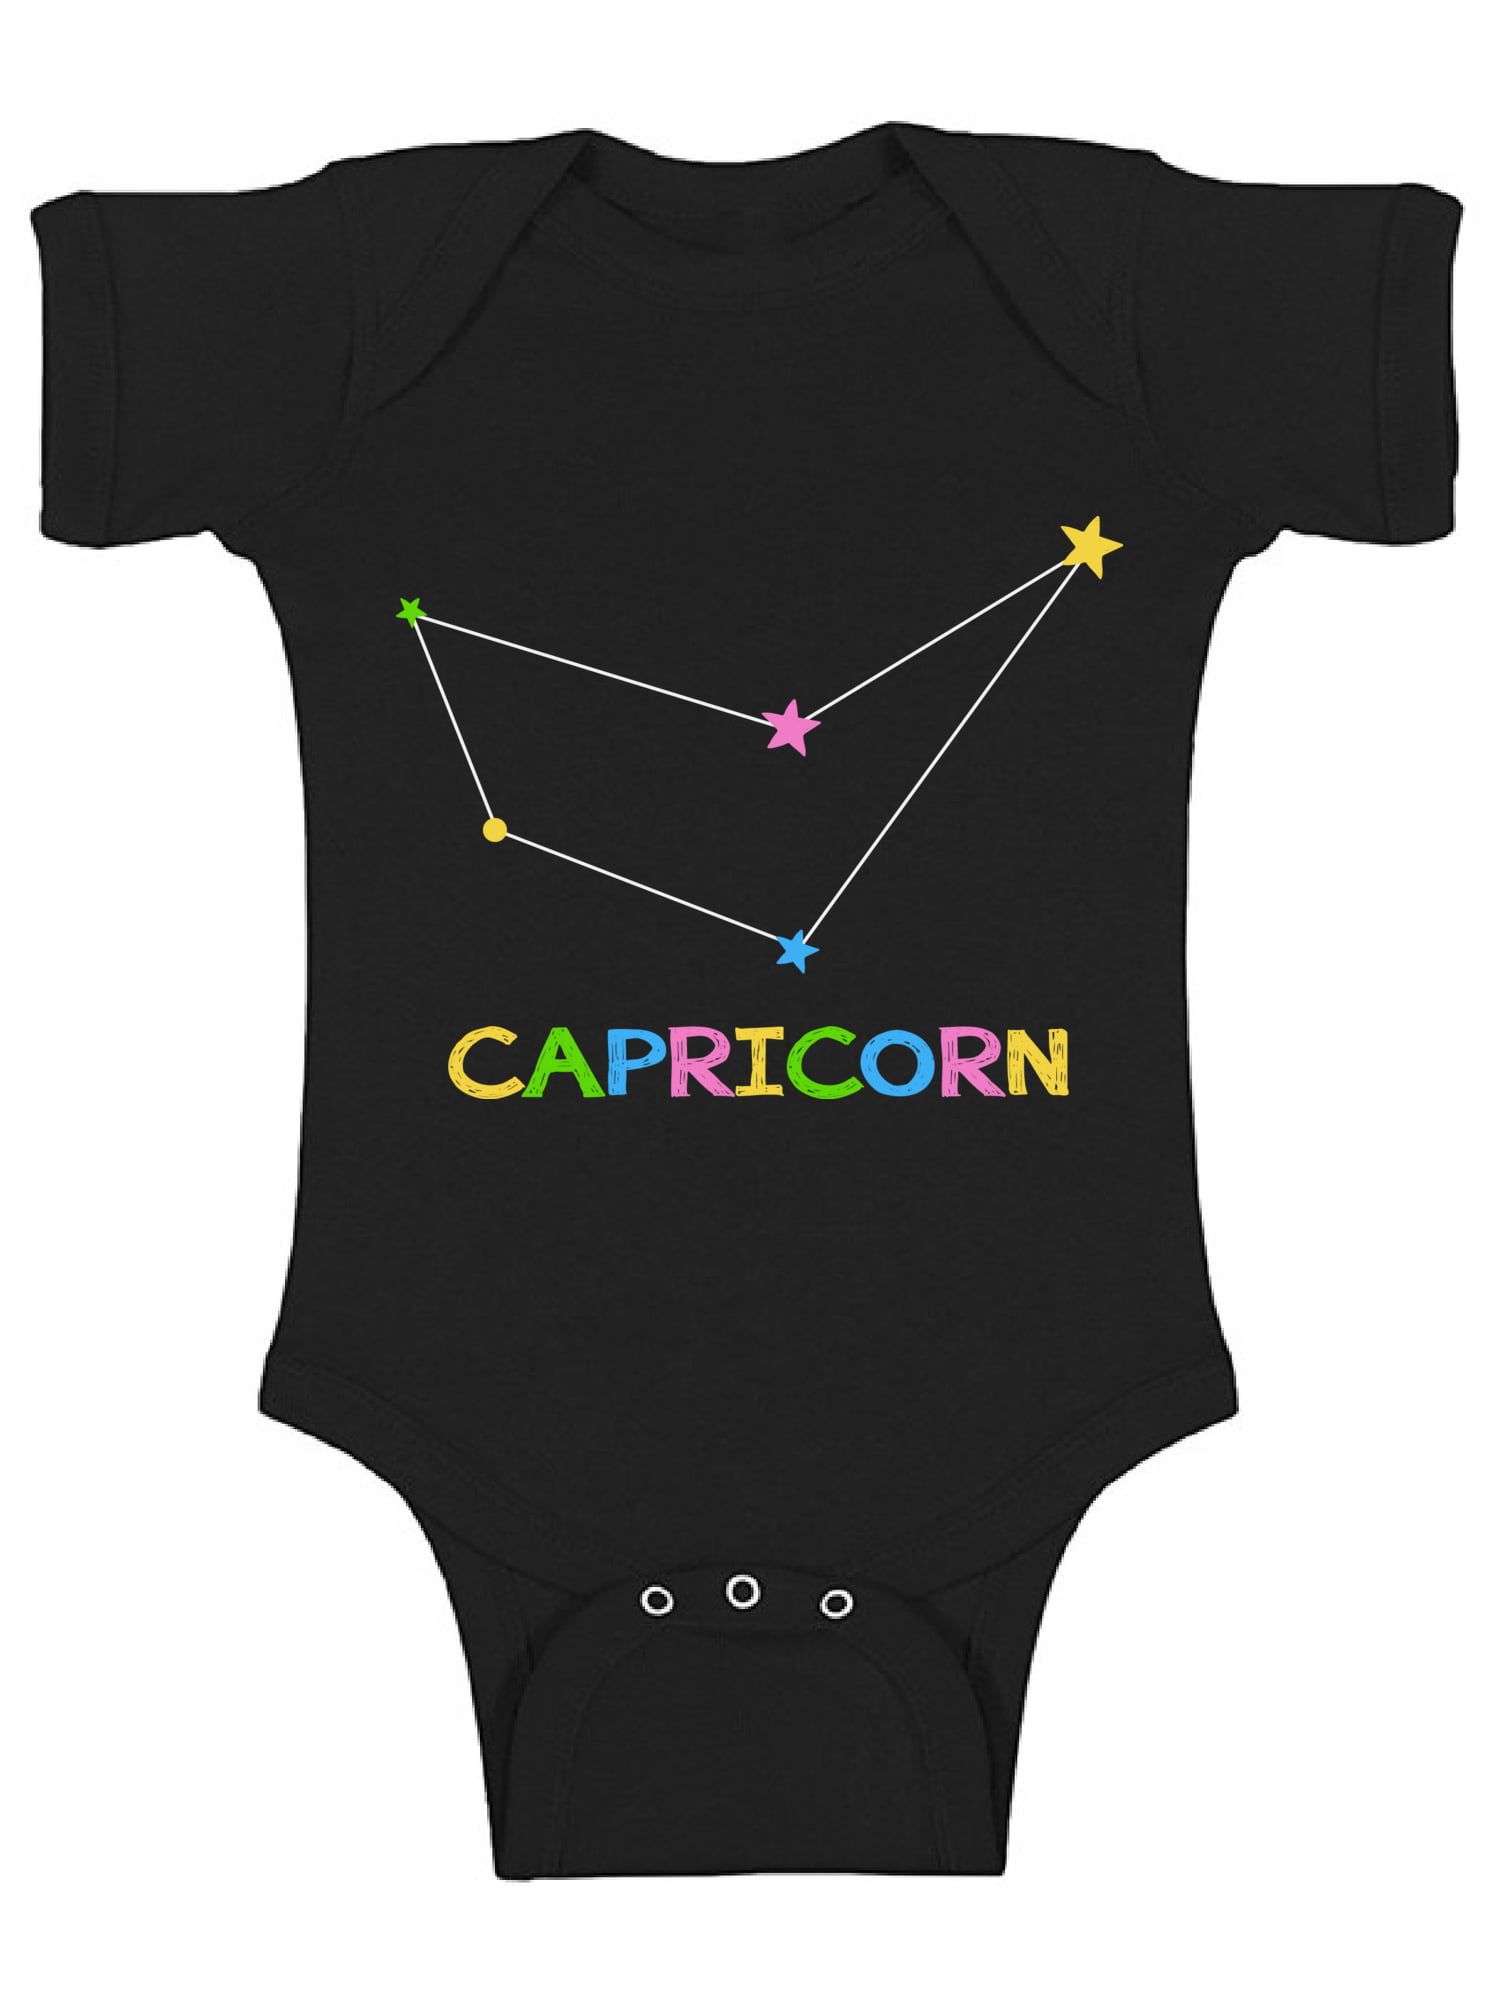 Capricorn Baby Girl Baby Boy Clothes - Zodiac Sign Outfit - Birthday Gifts  NB 6M 12M 18M 24M 